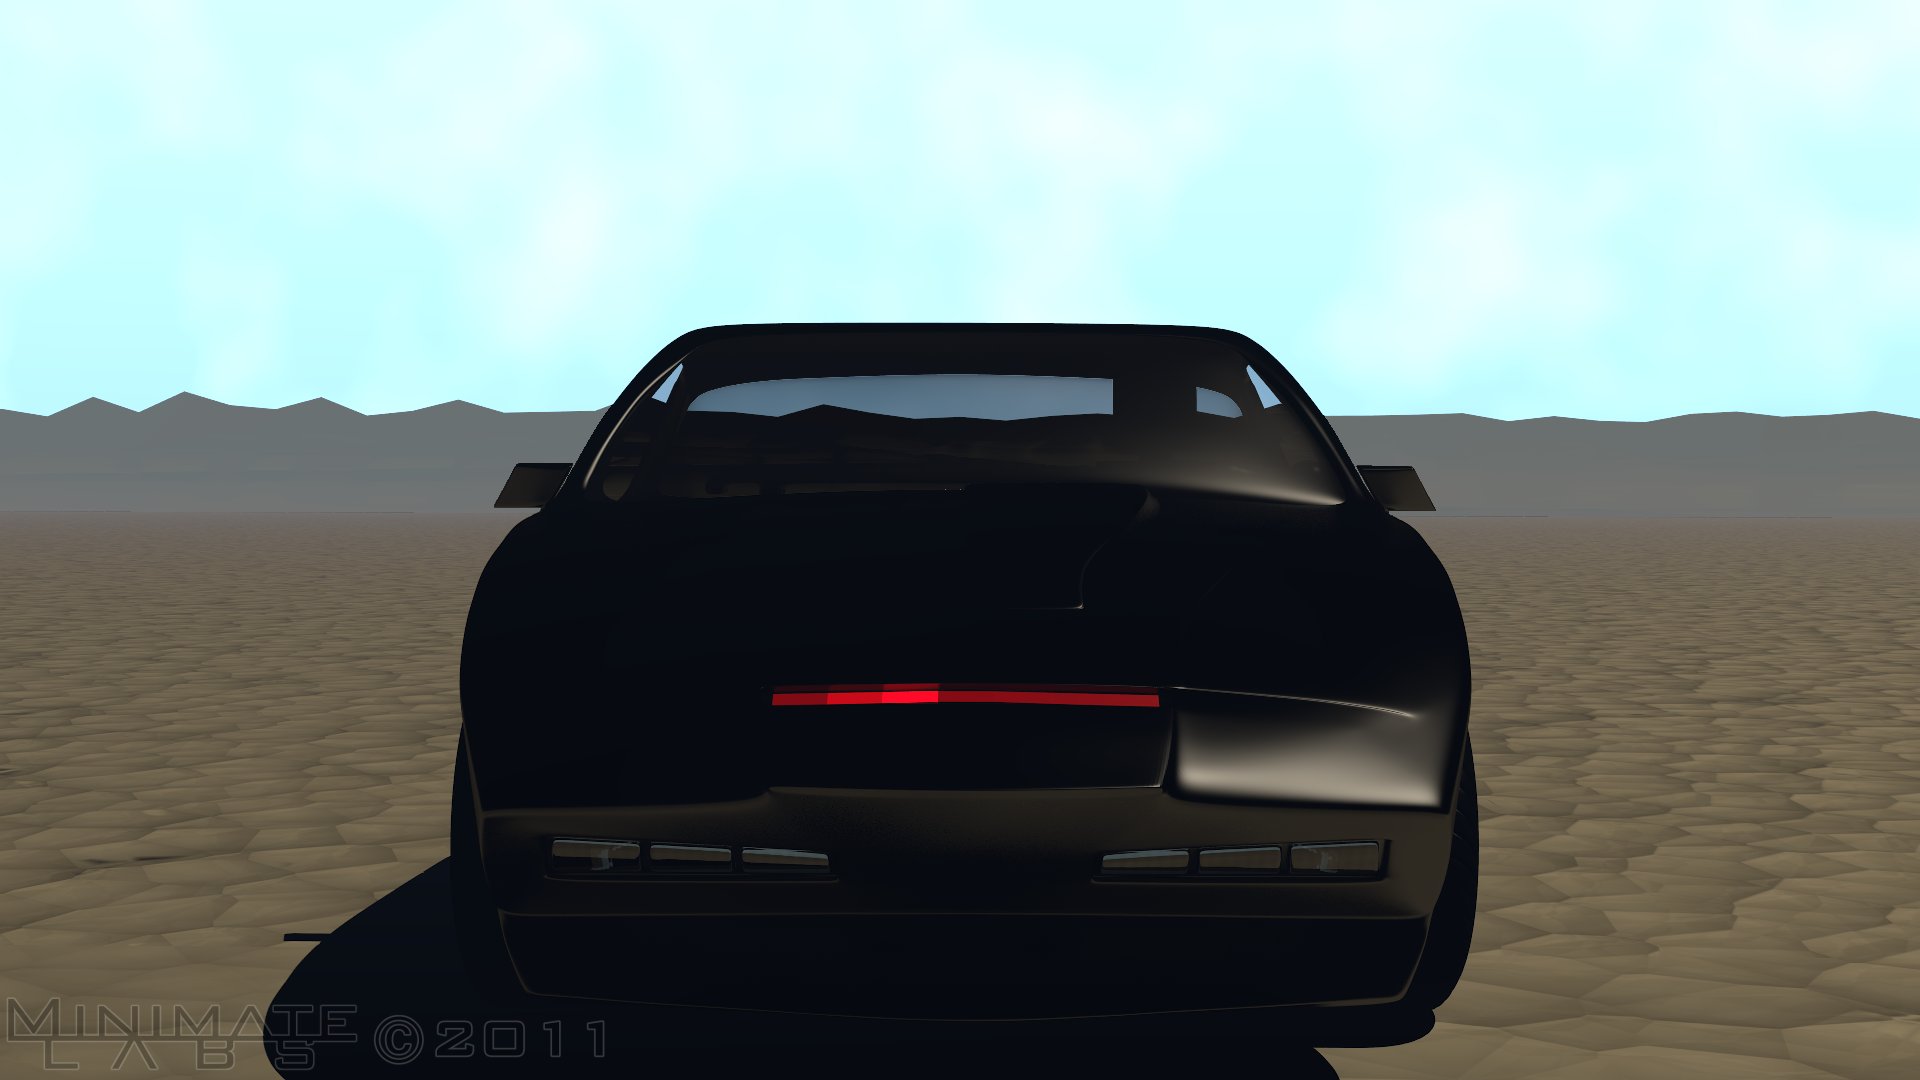 Knight Rider Live Wallpapers